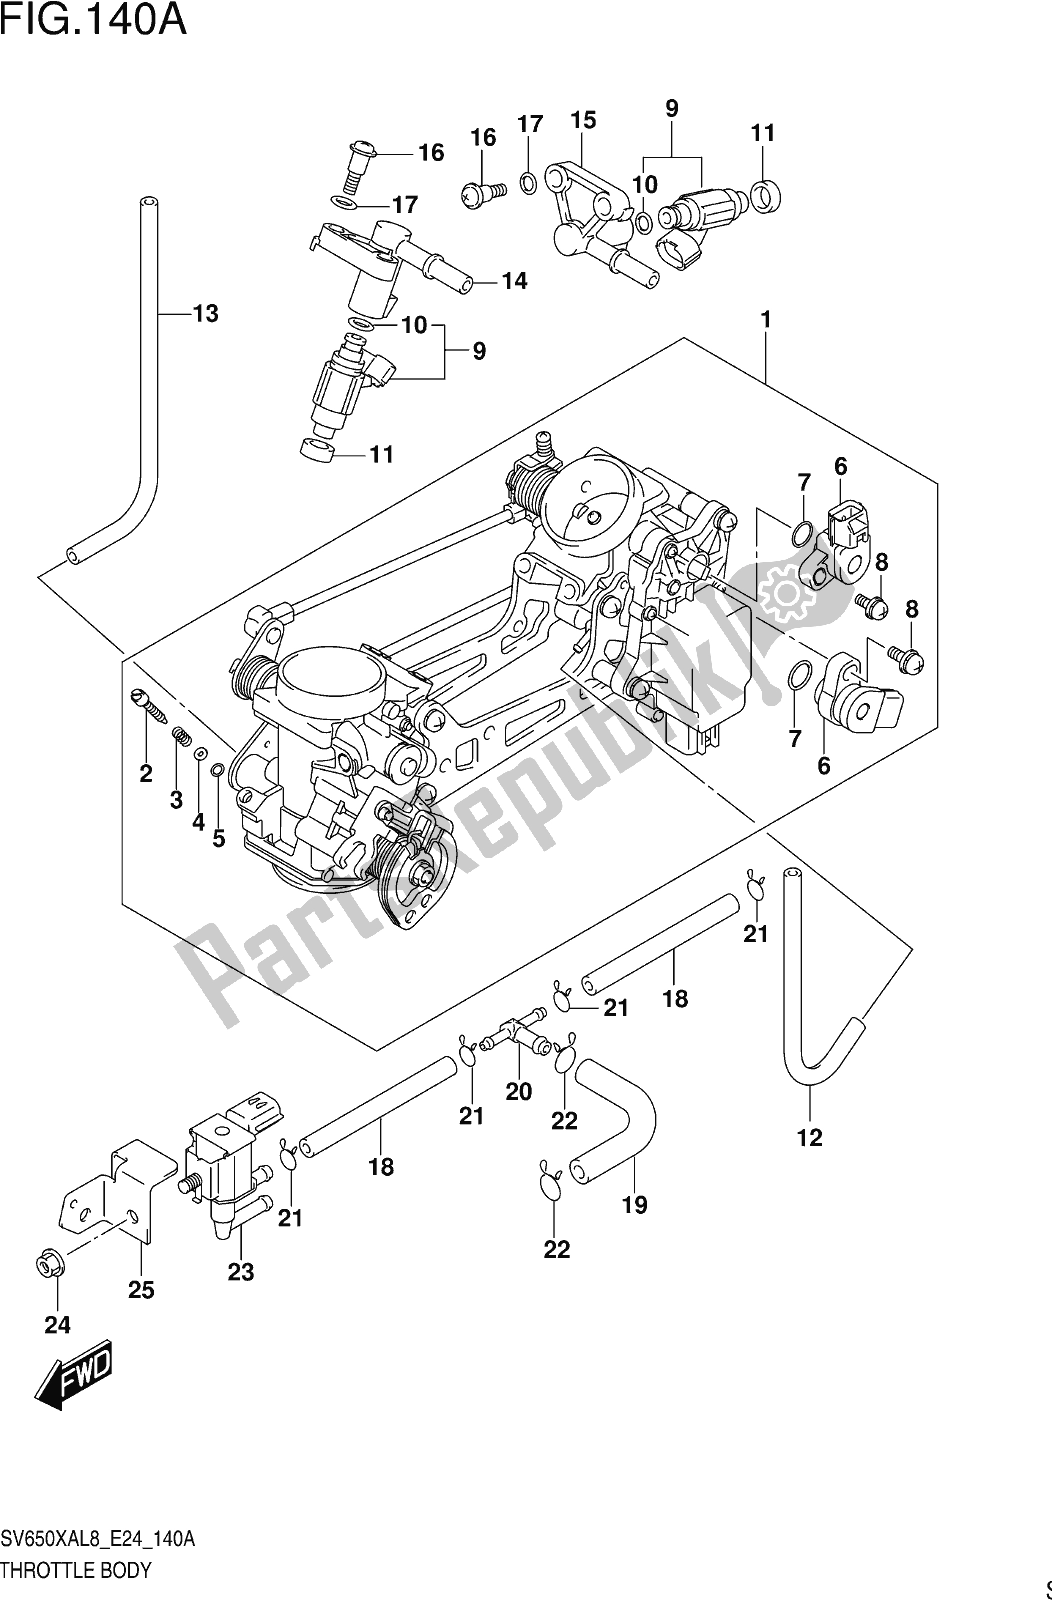 All parts for the Fig. 140a Throttle Body of the Suzuki SV 650 XA 2018